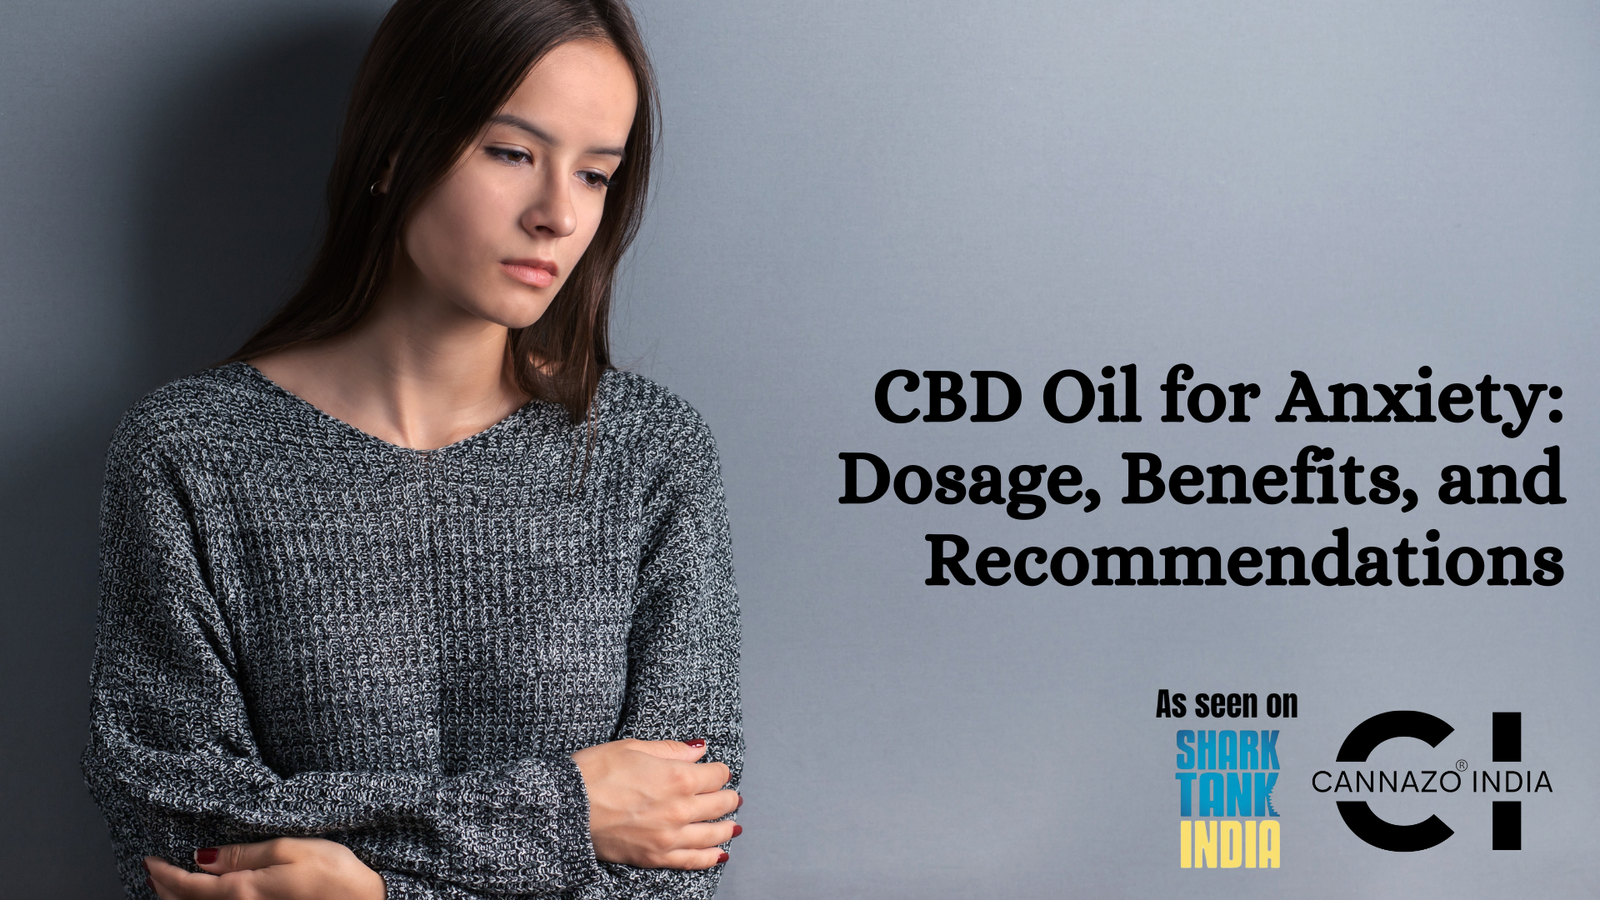 CBD Oil for Anxiety: Dosage, Benefits, and Recommendations